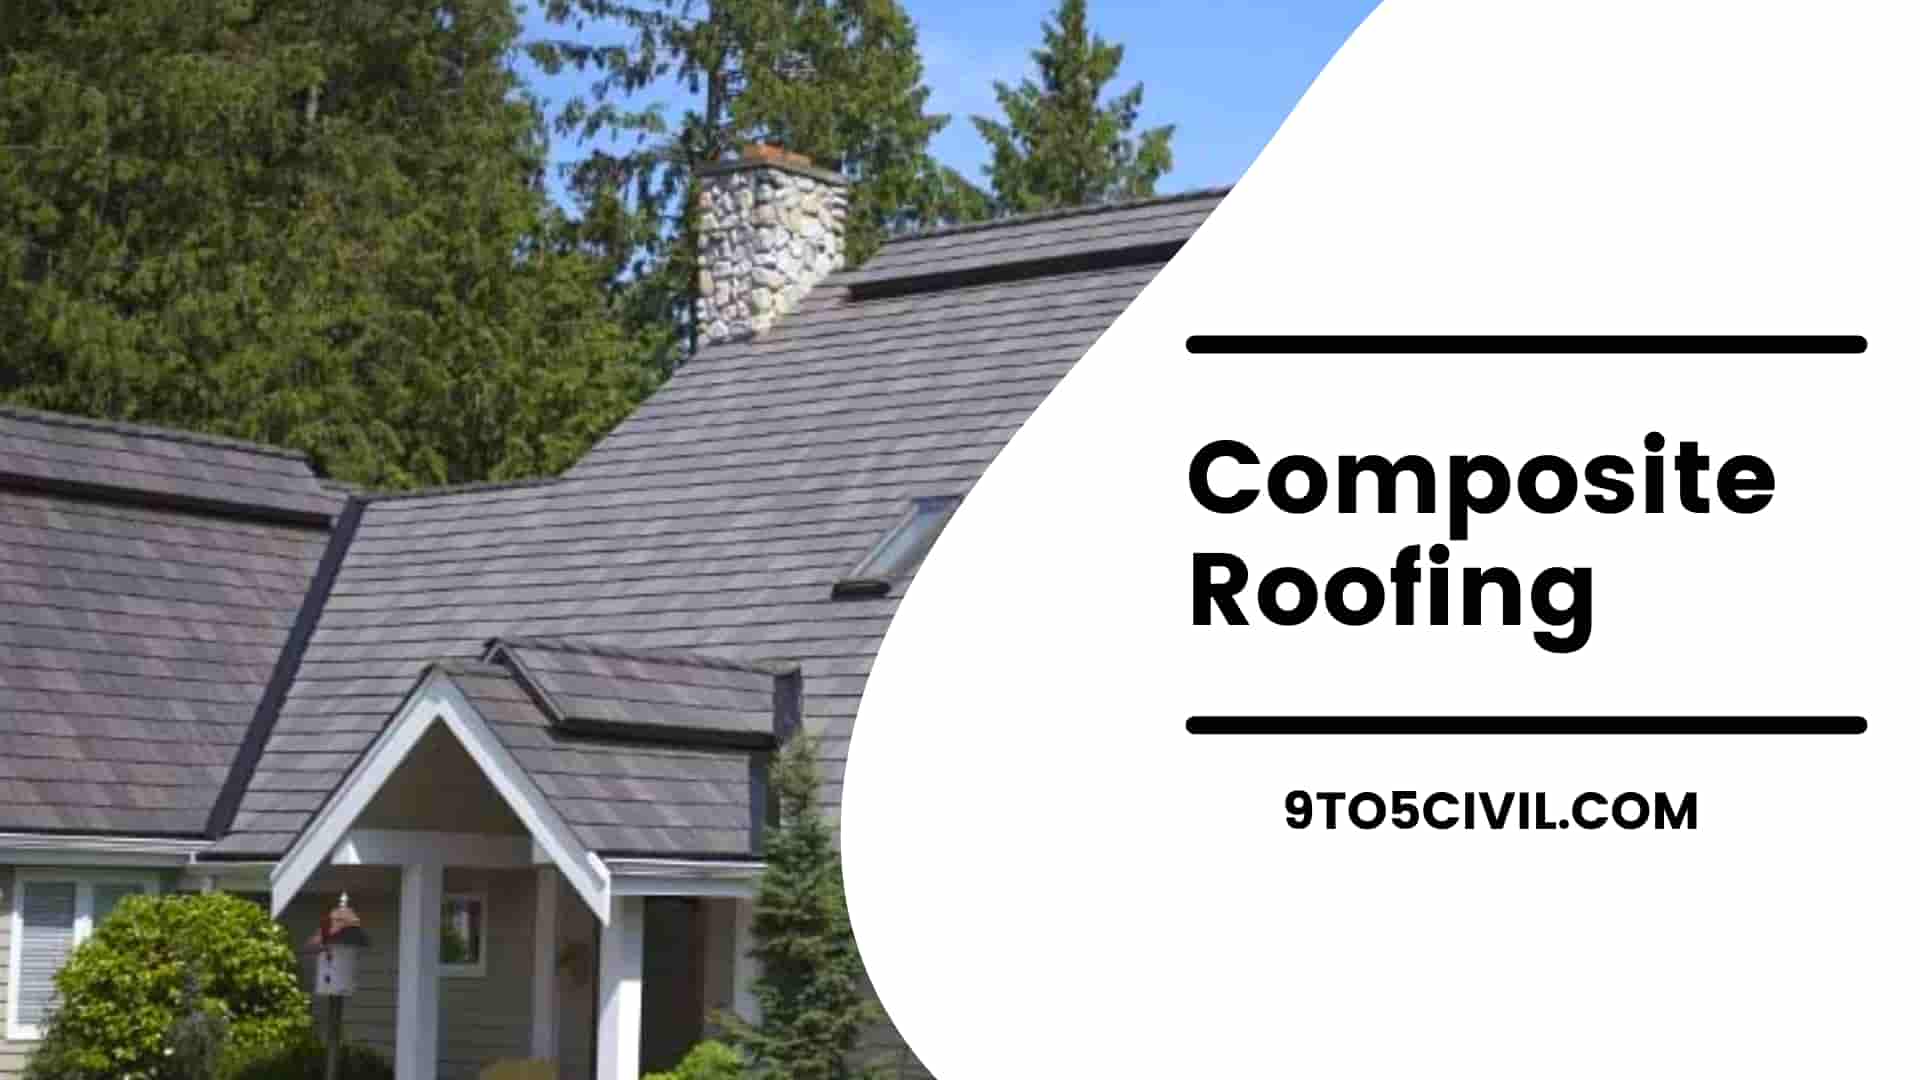 Composite Roofing 